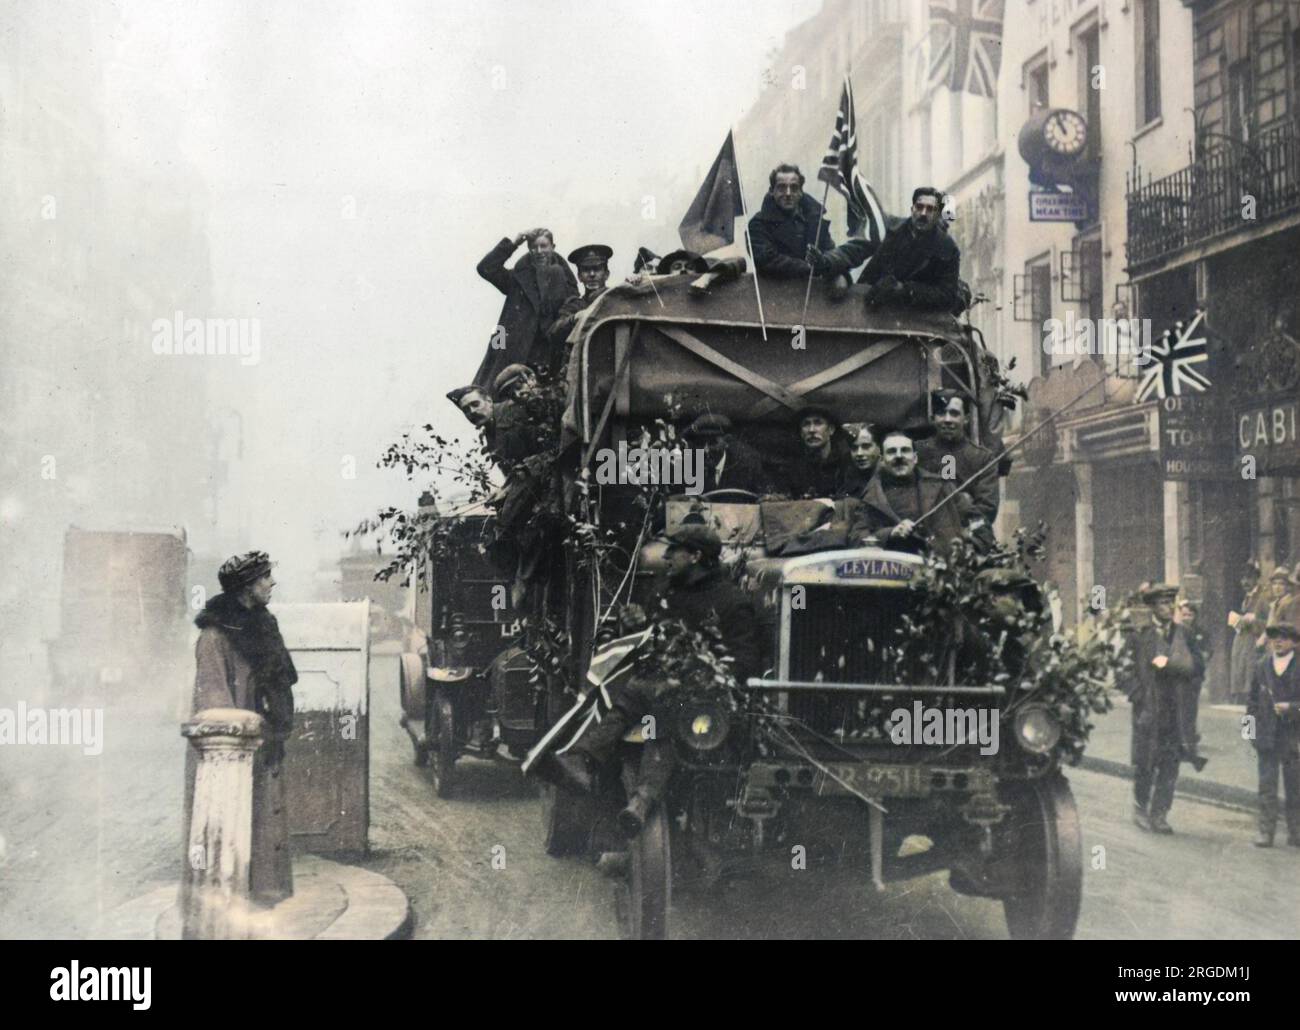 A Leyland lorry in London filled with men celebrating Armistice Day on 11th November 1918. Some wear military uniform, others civilian clothes. Stock Photo